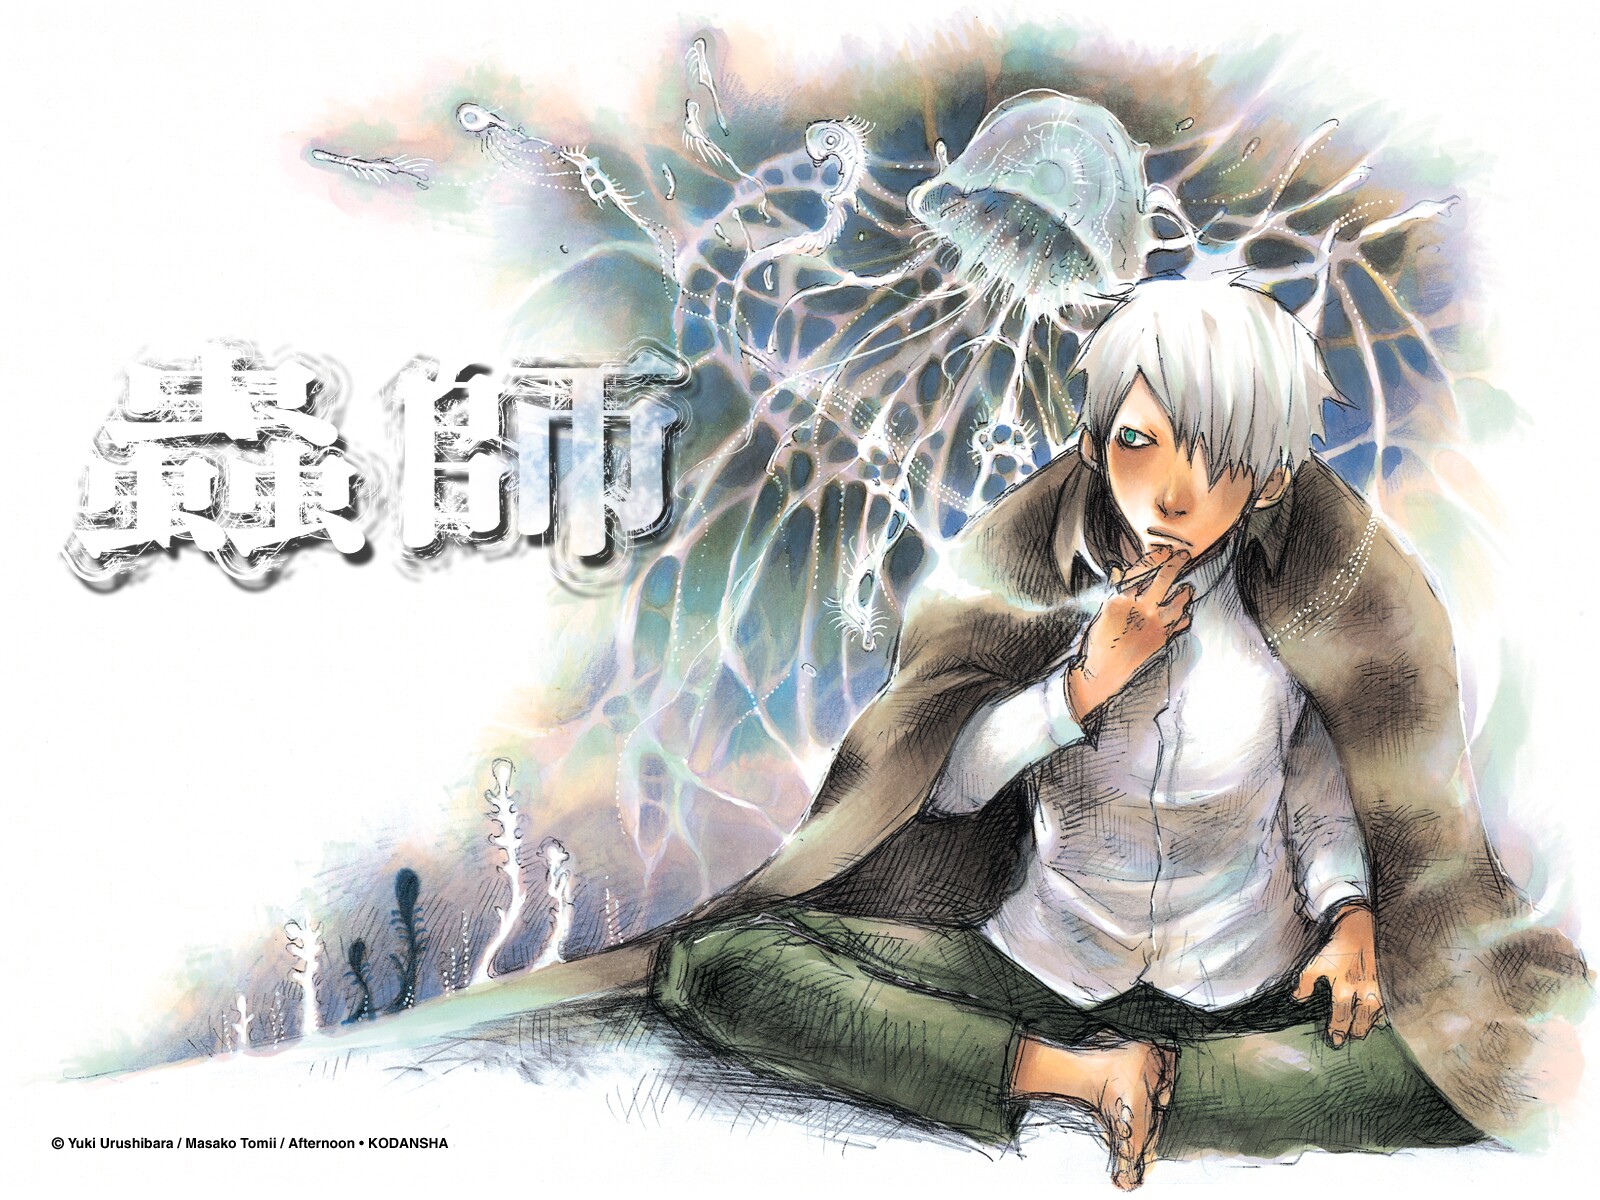 Ginko, the protagonist of Mushishi, standing in a serene anime landscape.